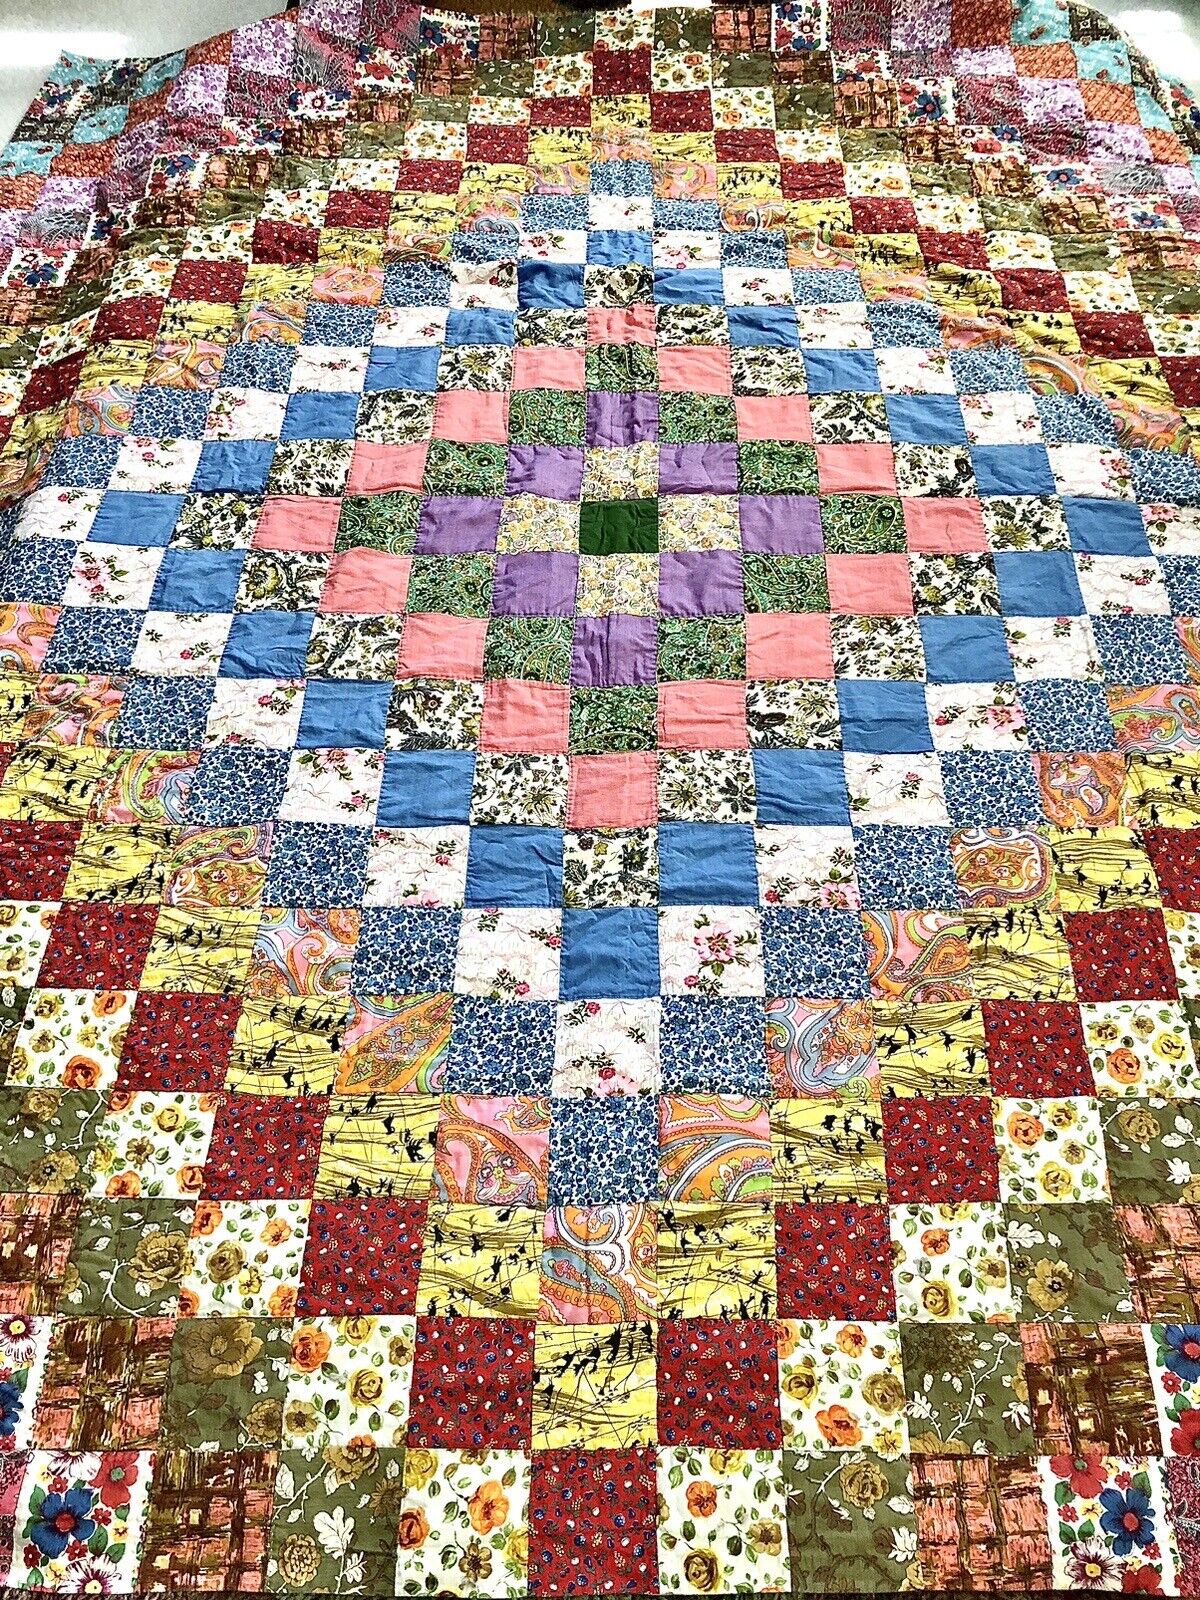 A Vintage Patchwork Quilt Amazing Color Handcrafted 78”x89”